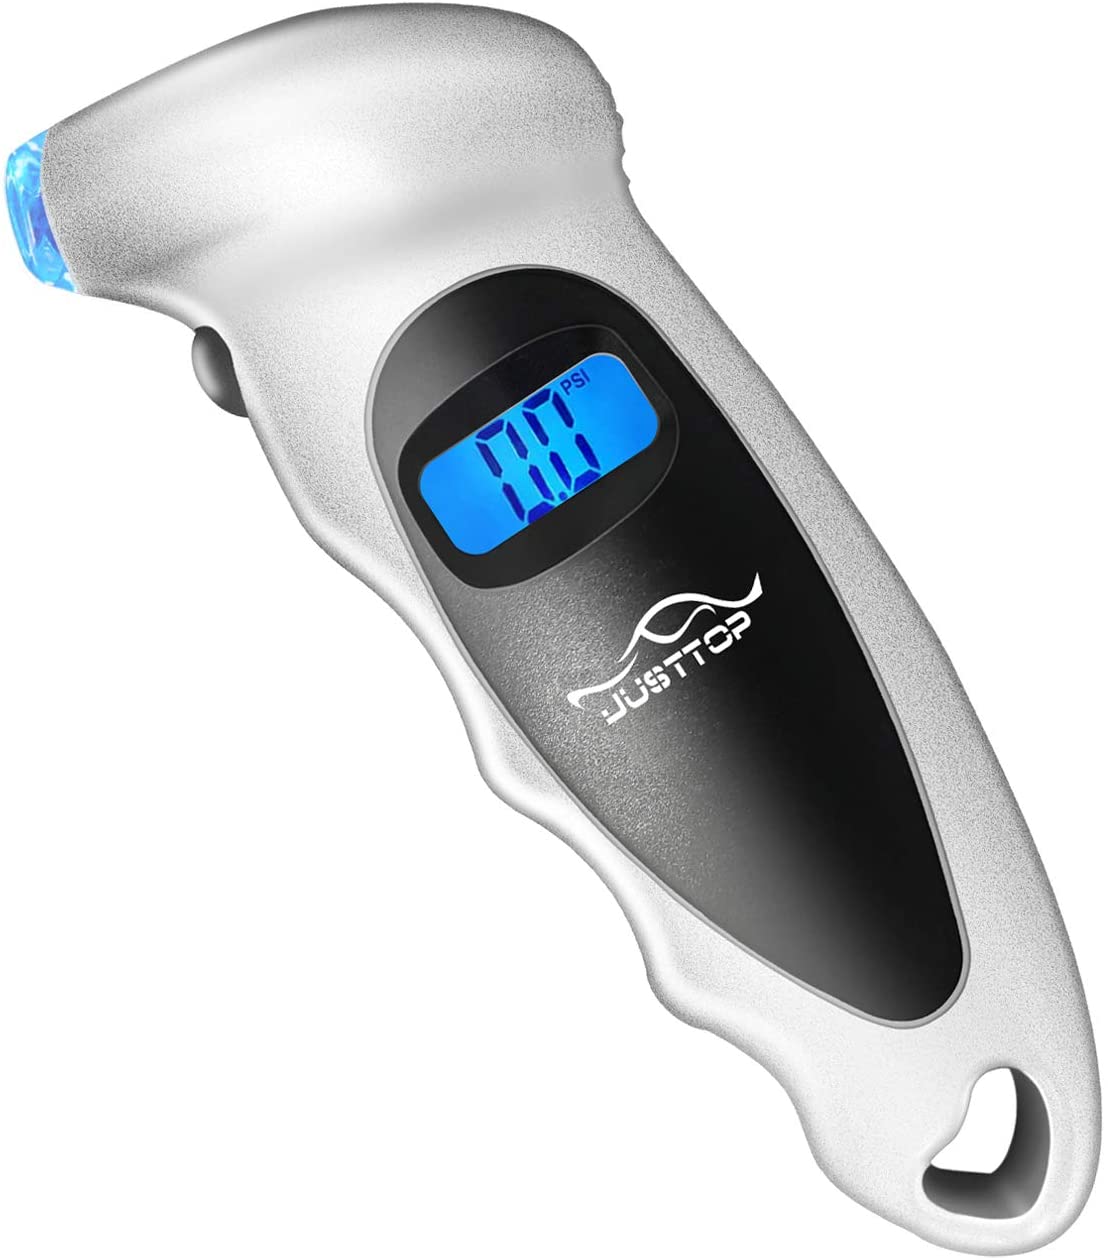 JUSTTOP Automatic Off Lighted Nozzle Tire Pressure Gauge